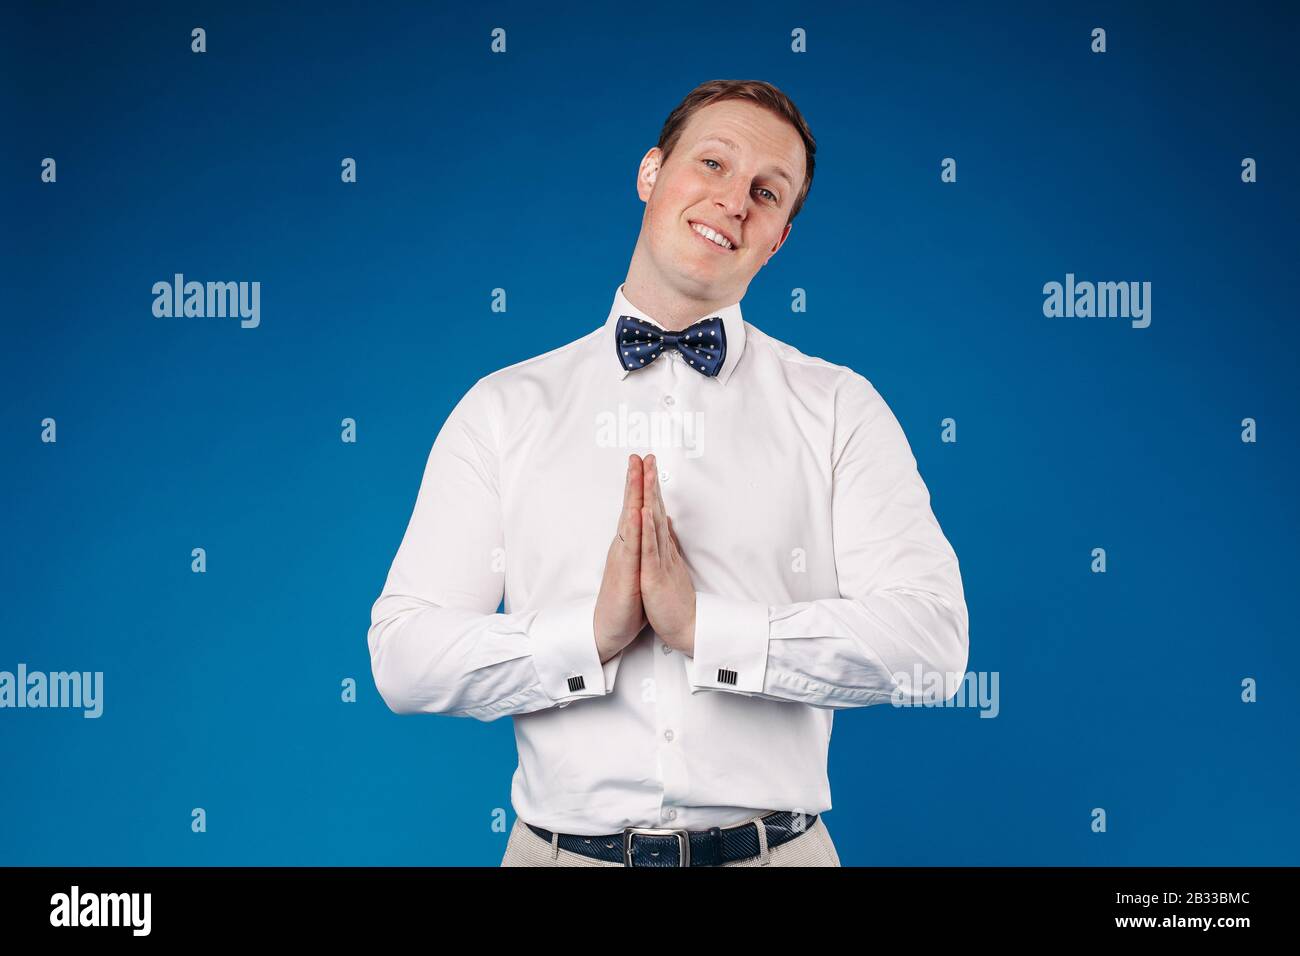 Man wearing white shirt and bow tie showing sign of pistol Stock Photo